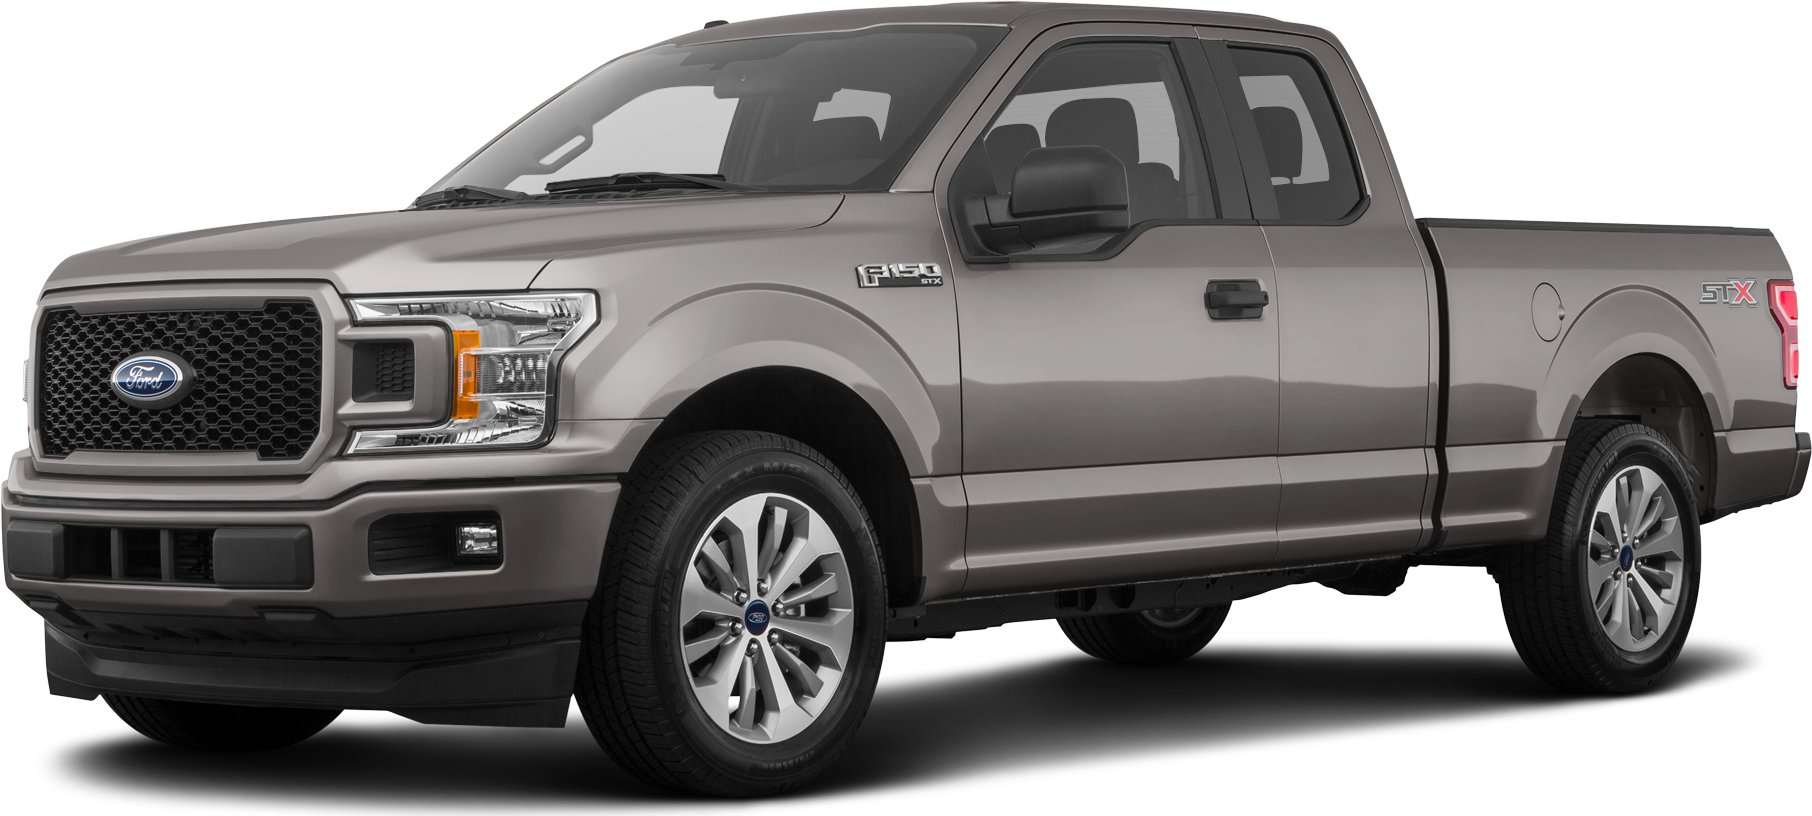 2018 Ford F150 Value Ratings